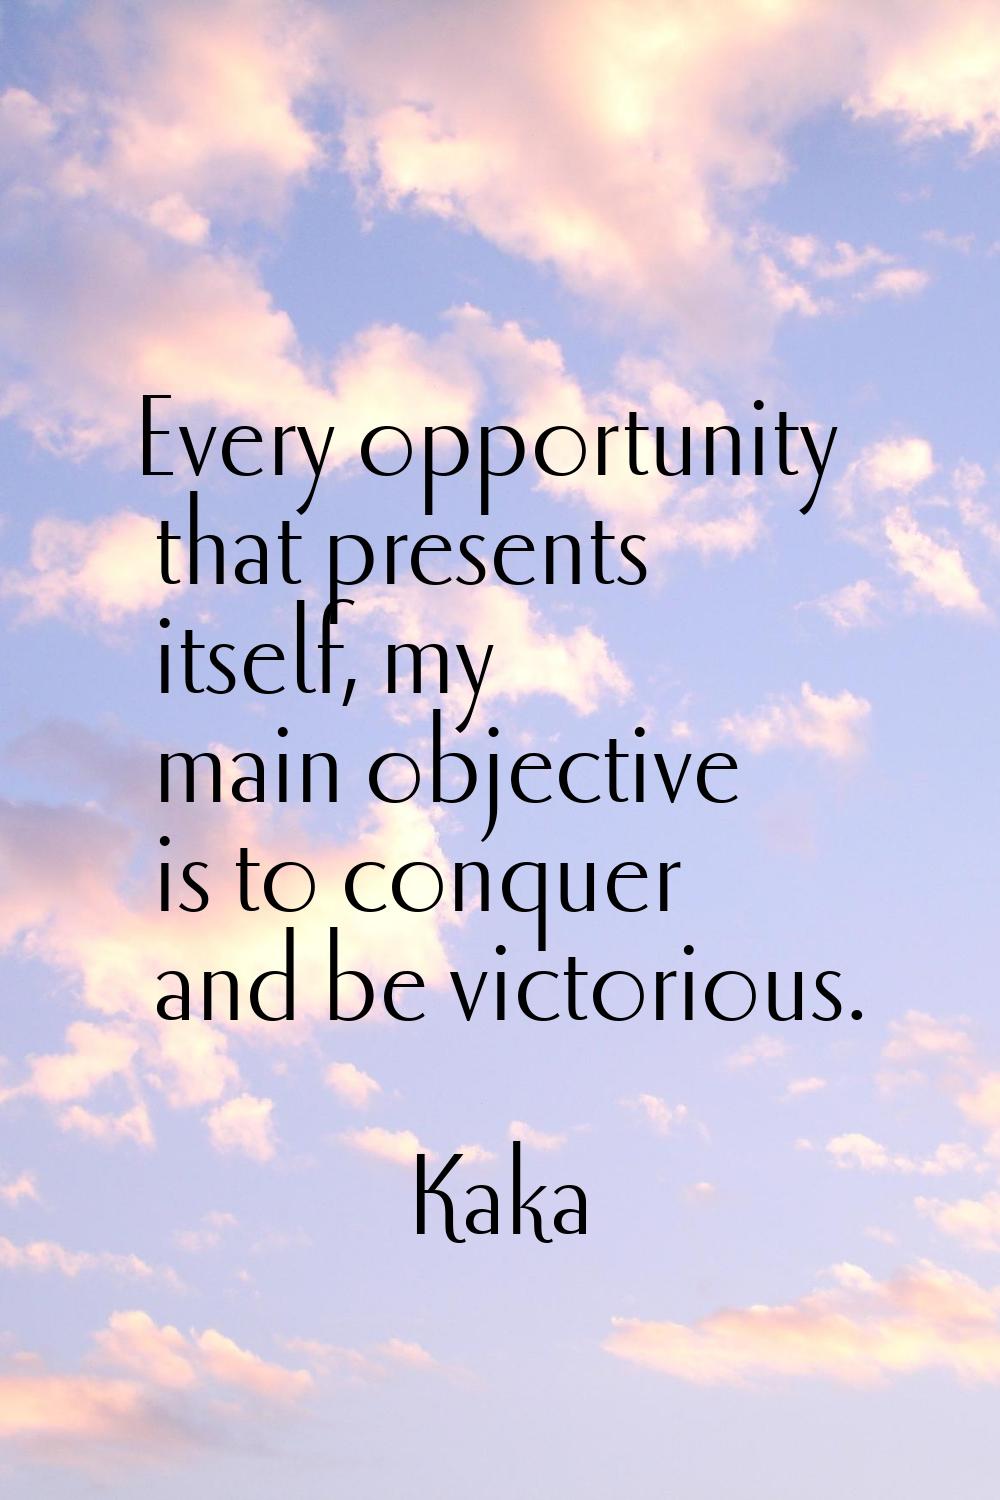 Every opportunity that presents itself, my main objective is to conquer and be victorious.